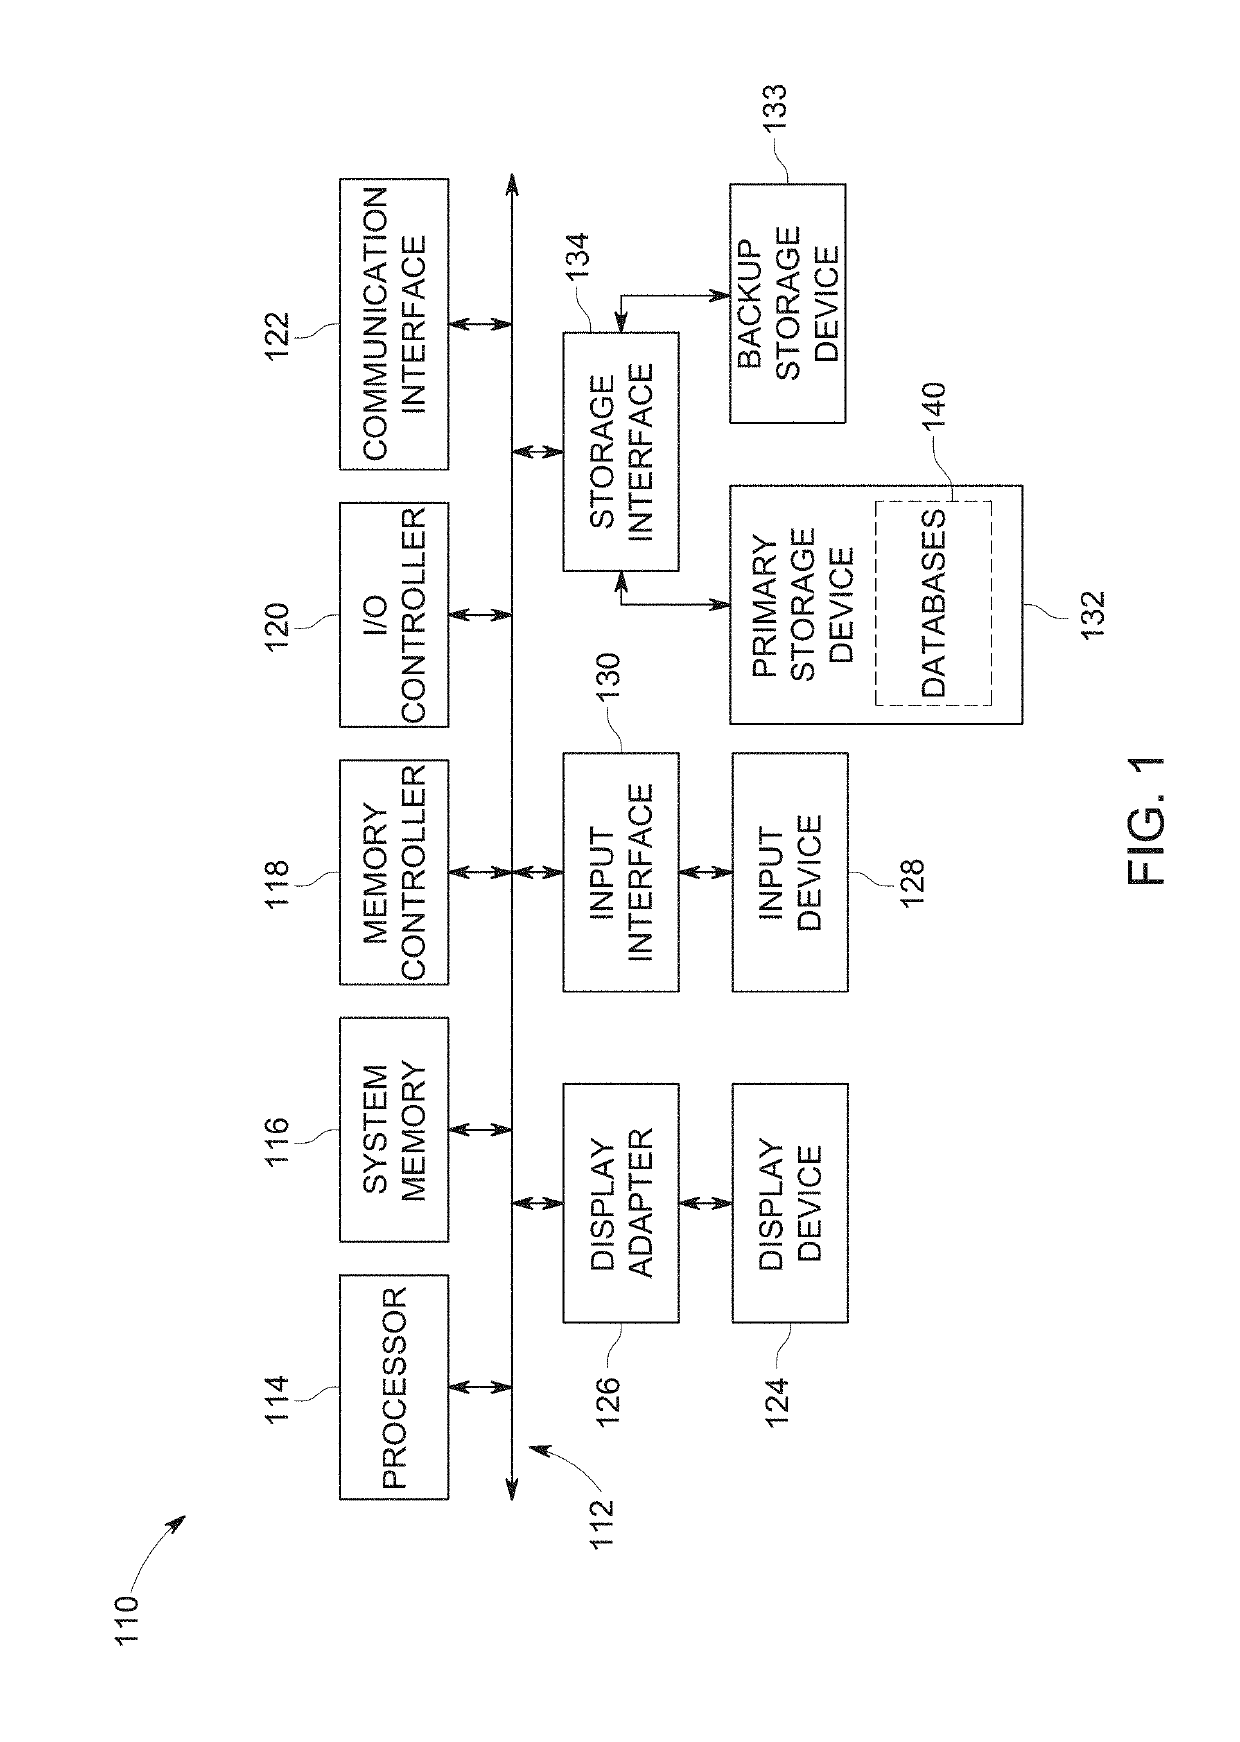 Component configuration for a robust tunable sensor system for a high radiation environment